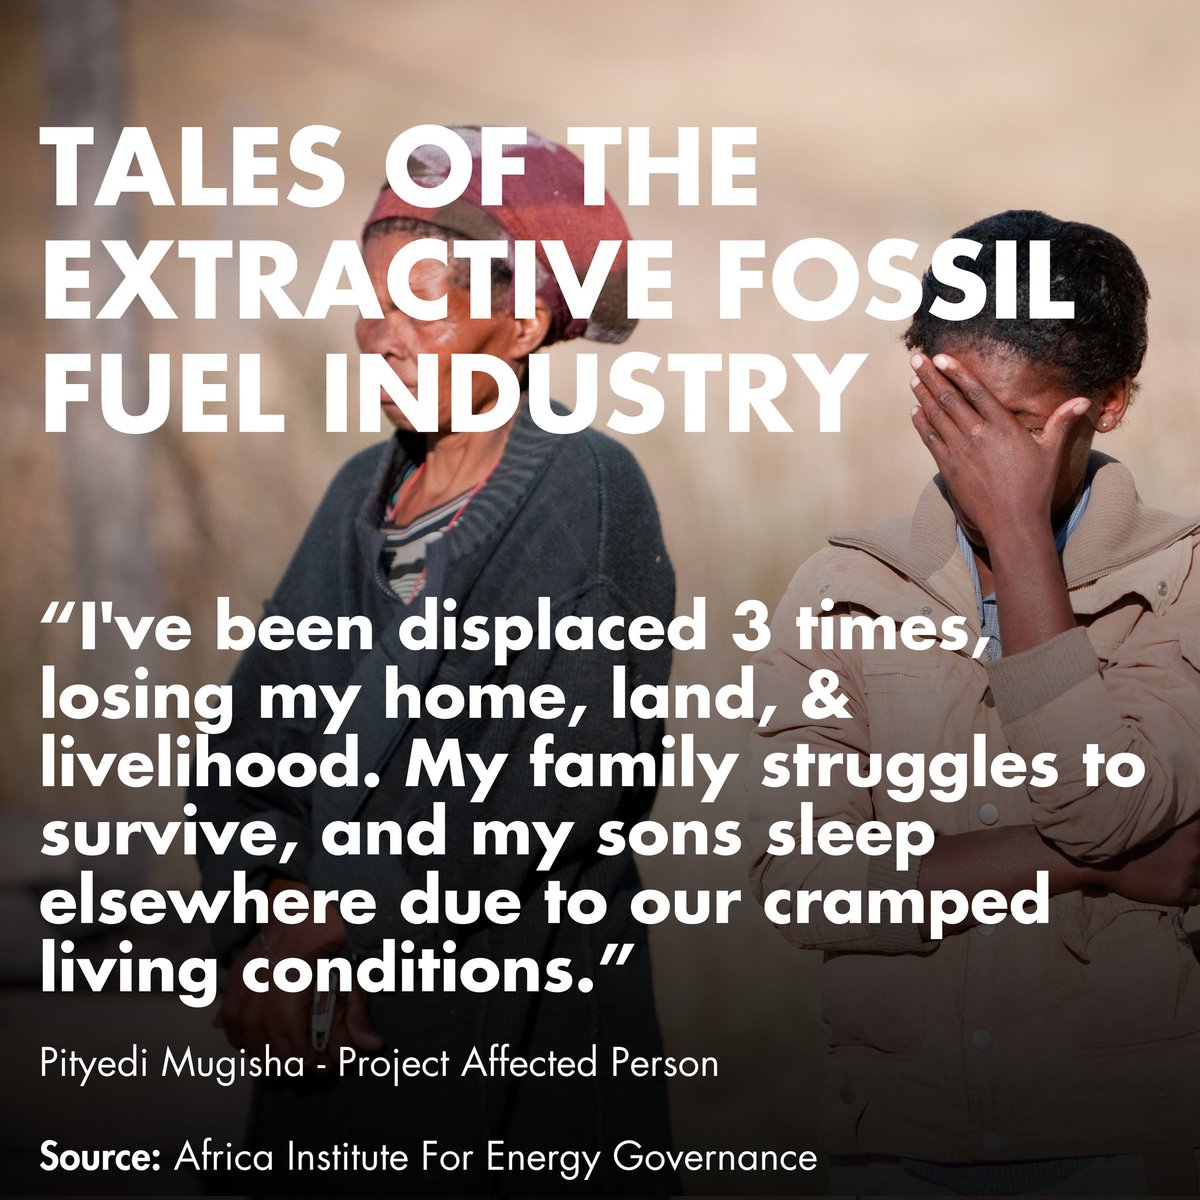 ➡️Family now struggles to survive after displacement. #100YearsOfClimateDamage #CenturyOfClimateChaos #STOPTOTAL #EndFossilFuels @TotalEnergies @TotalEnergiesFR @Europarl_EN